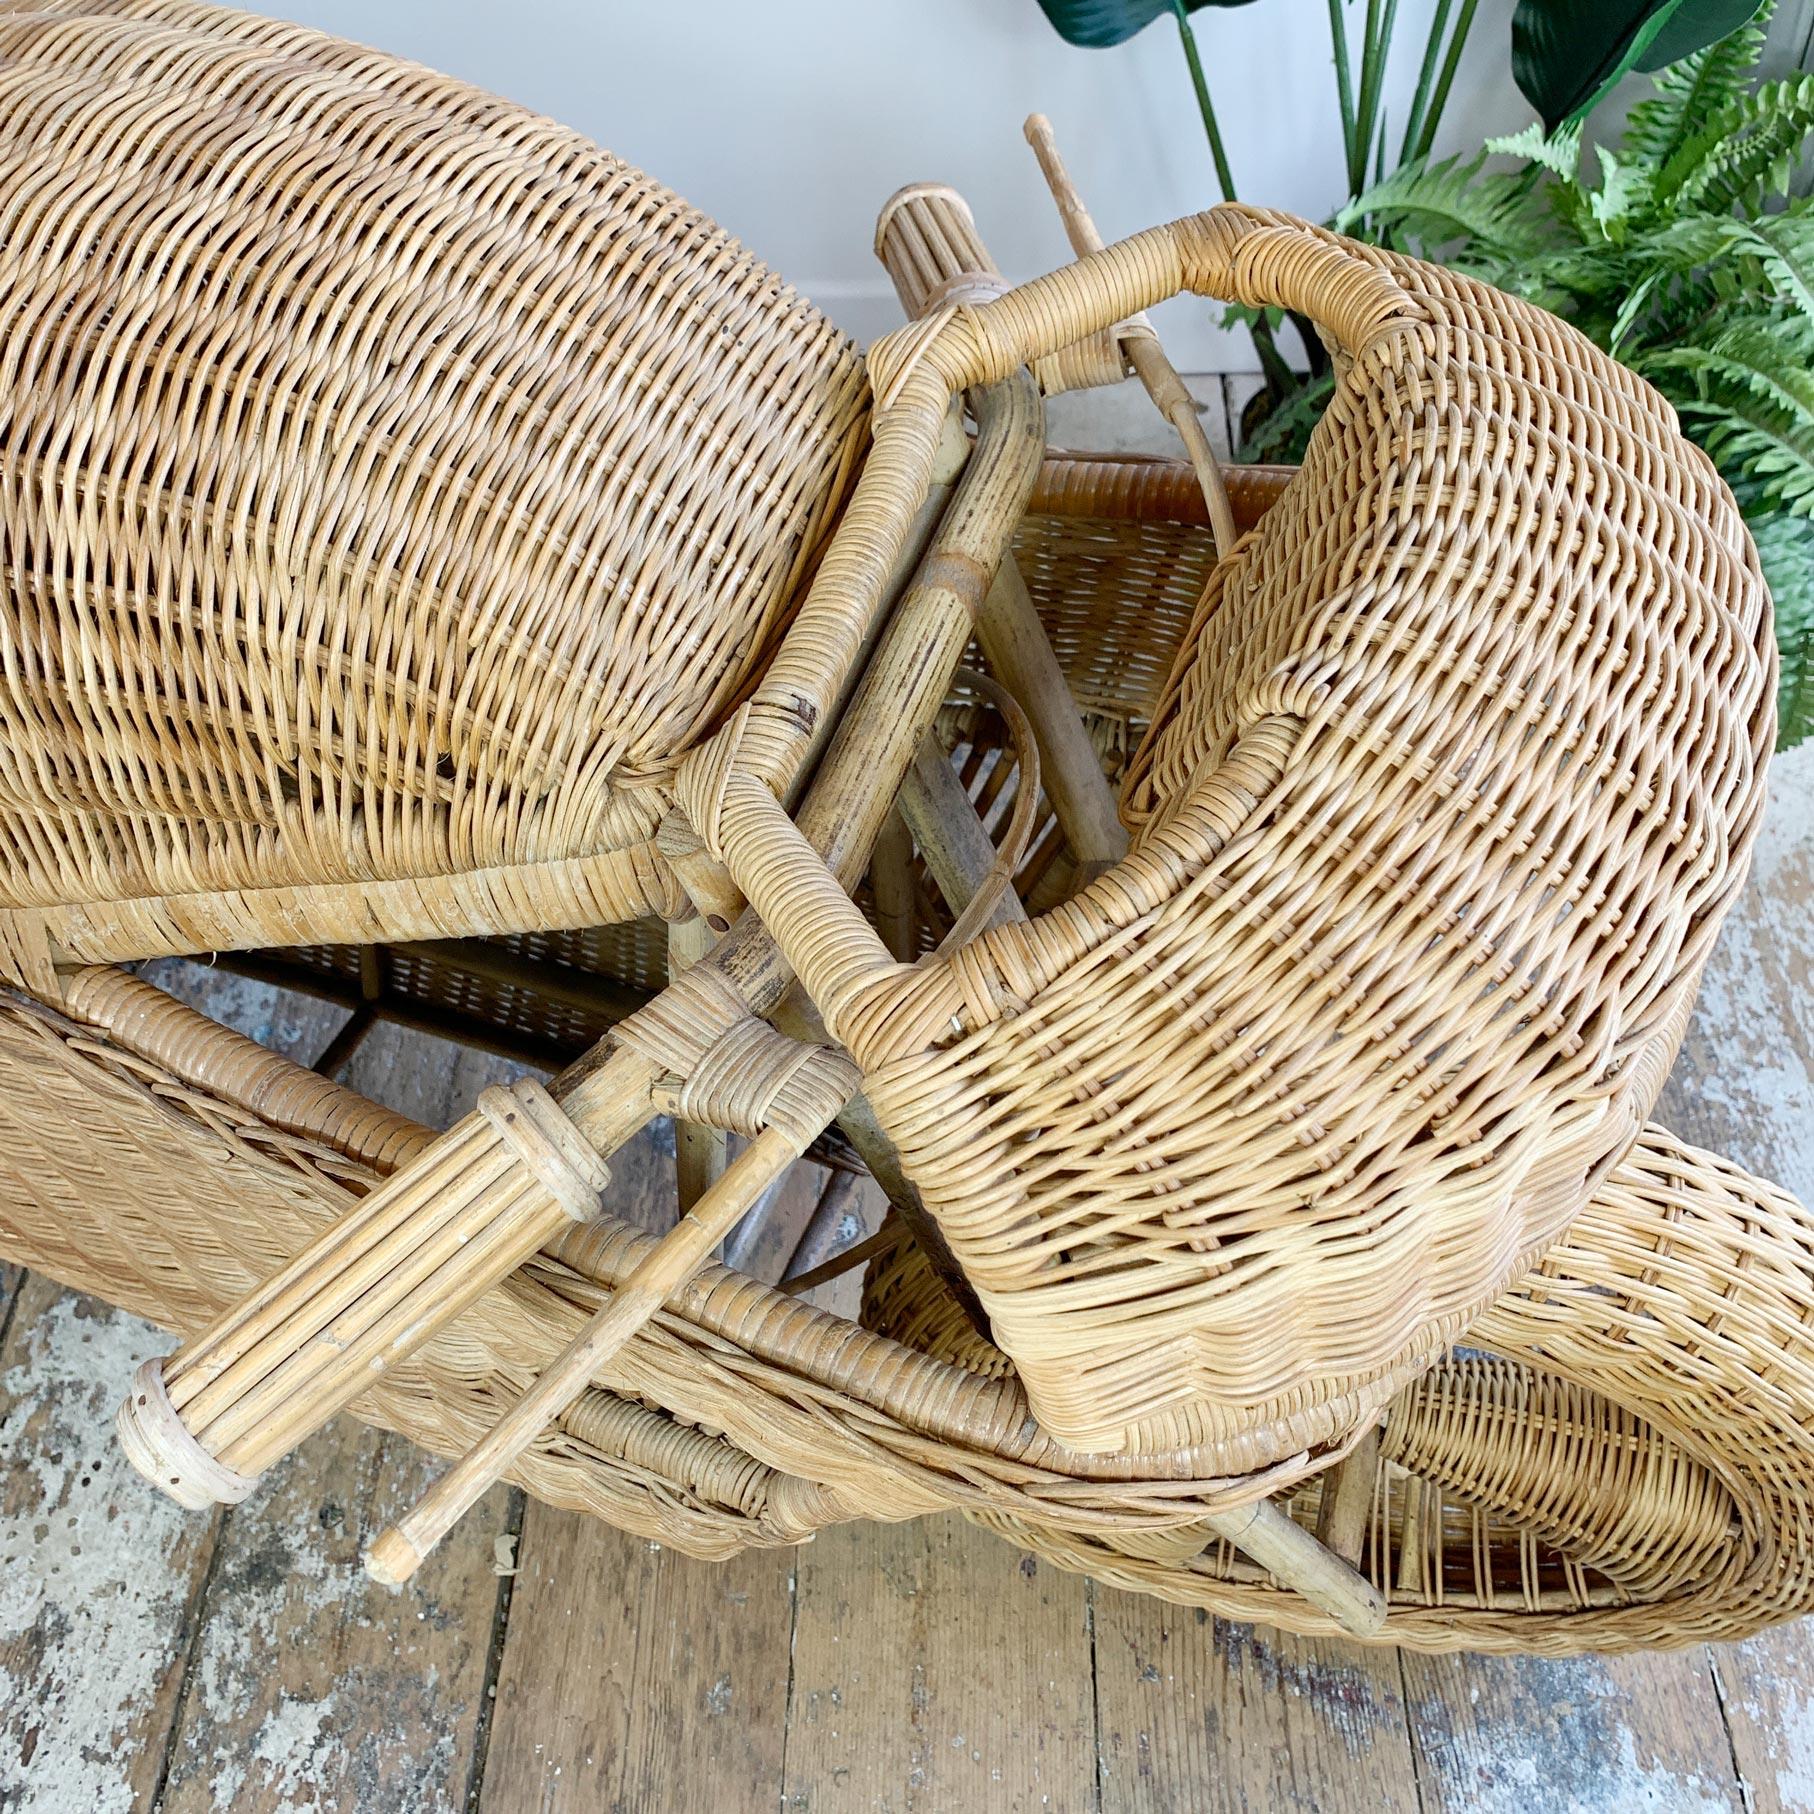 Exceptional Life Size Wicker and Bamboo Racing Motorcycle For Sale 4